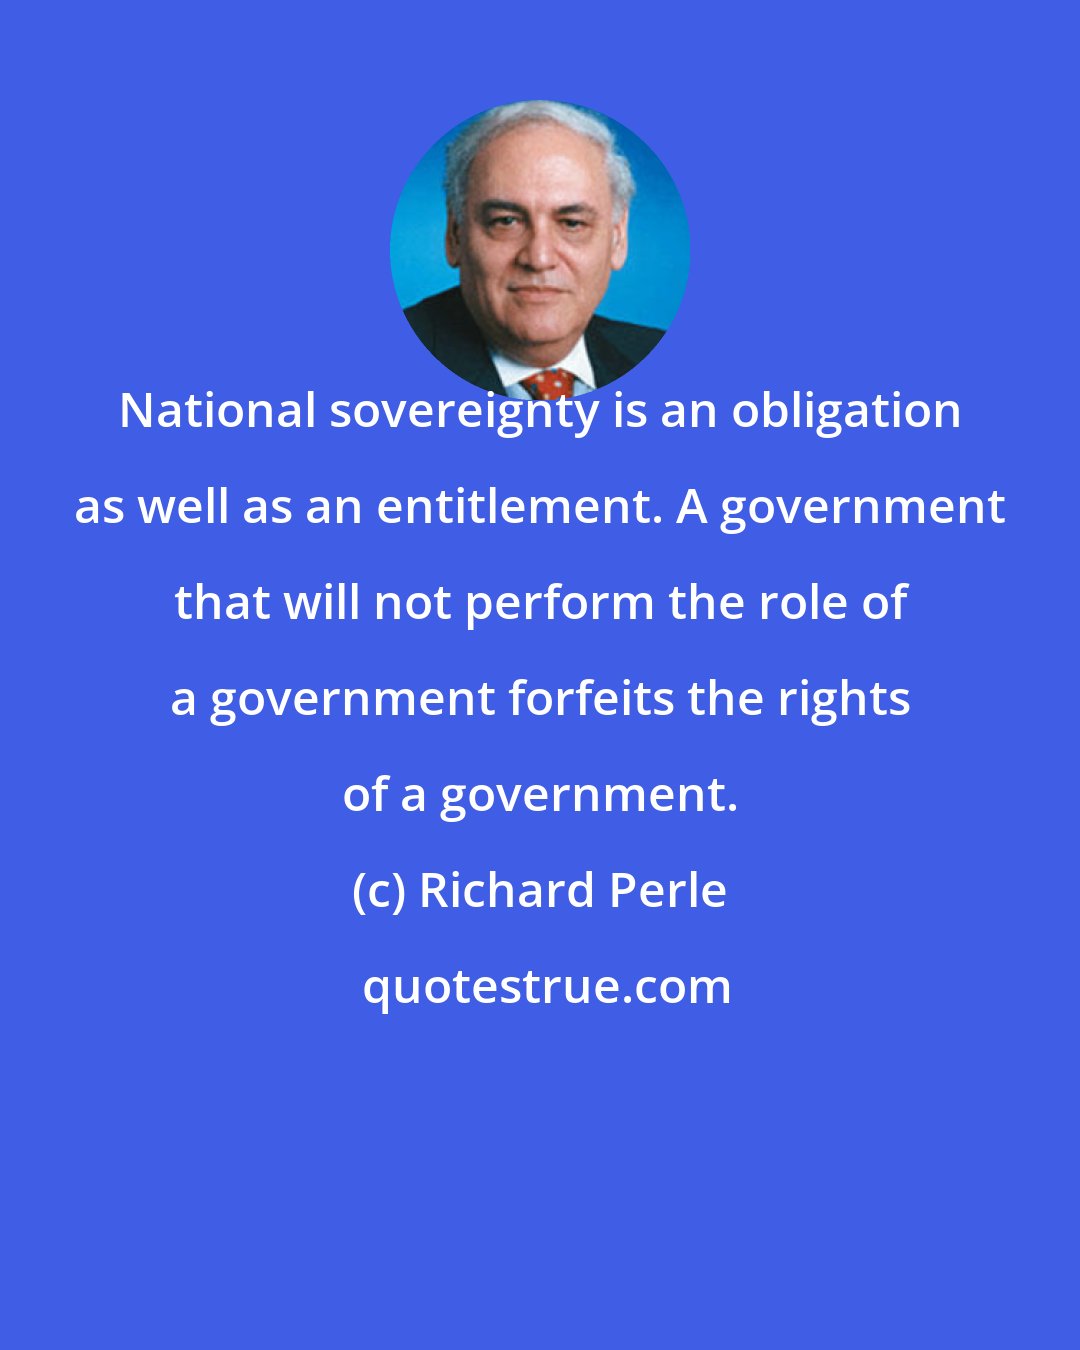 Richard Perle: National sovereignty is an obligation as well as an entitlement. A government that will not perform the role of a government forfeits the rights of a government.